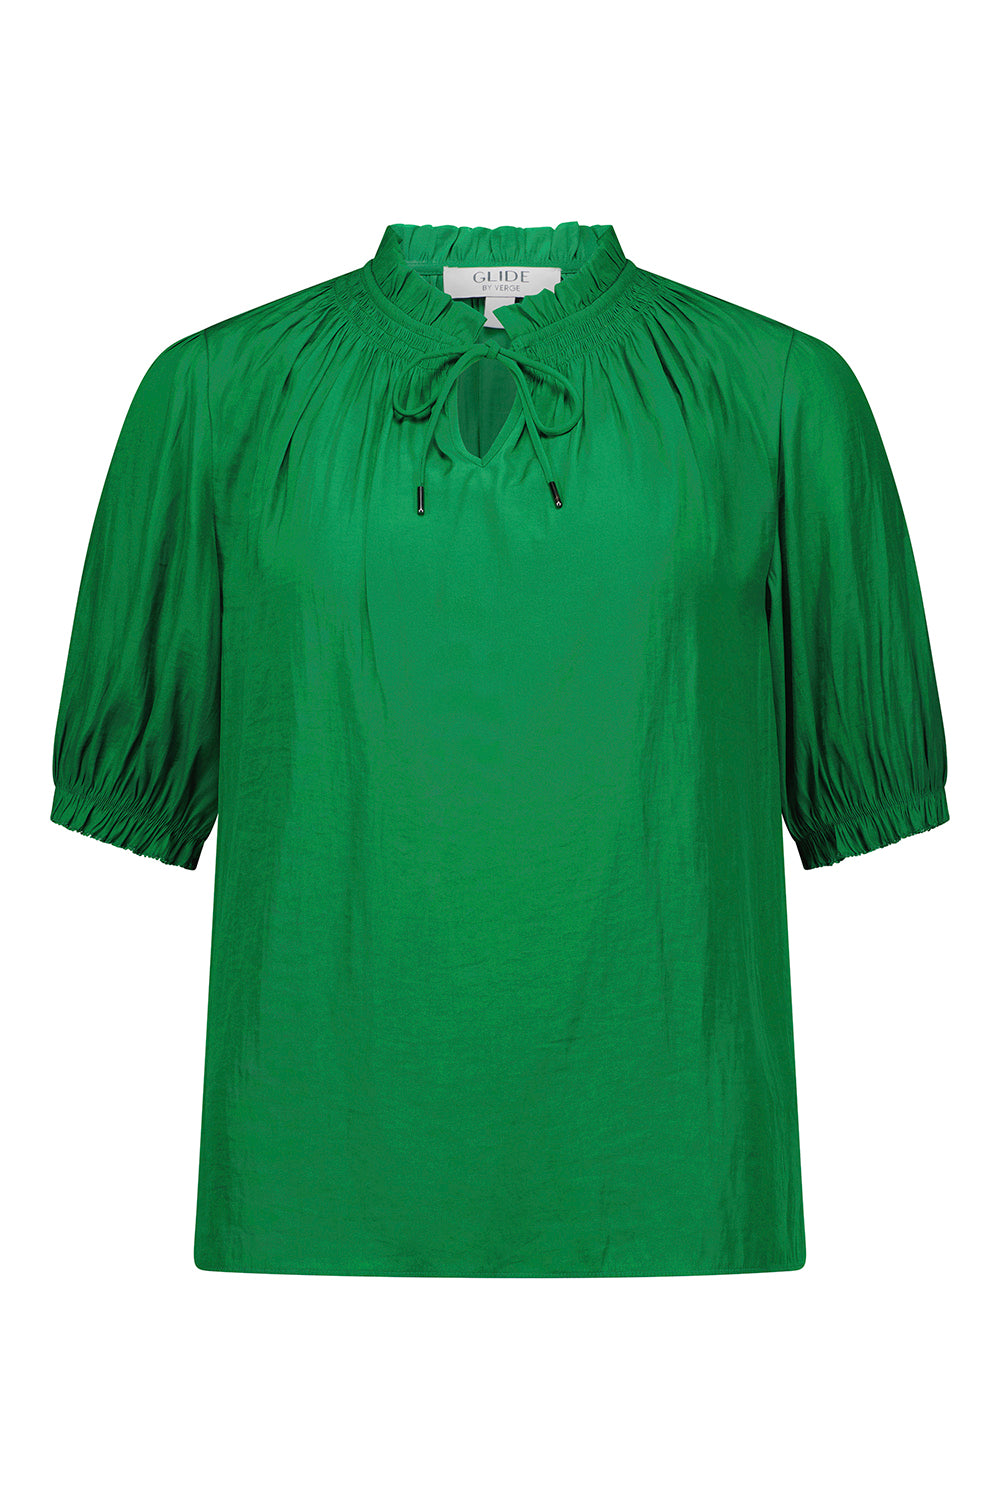 Glide by Verge - Reflection Top - Emerald - VERGE